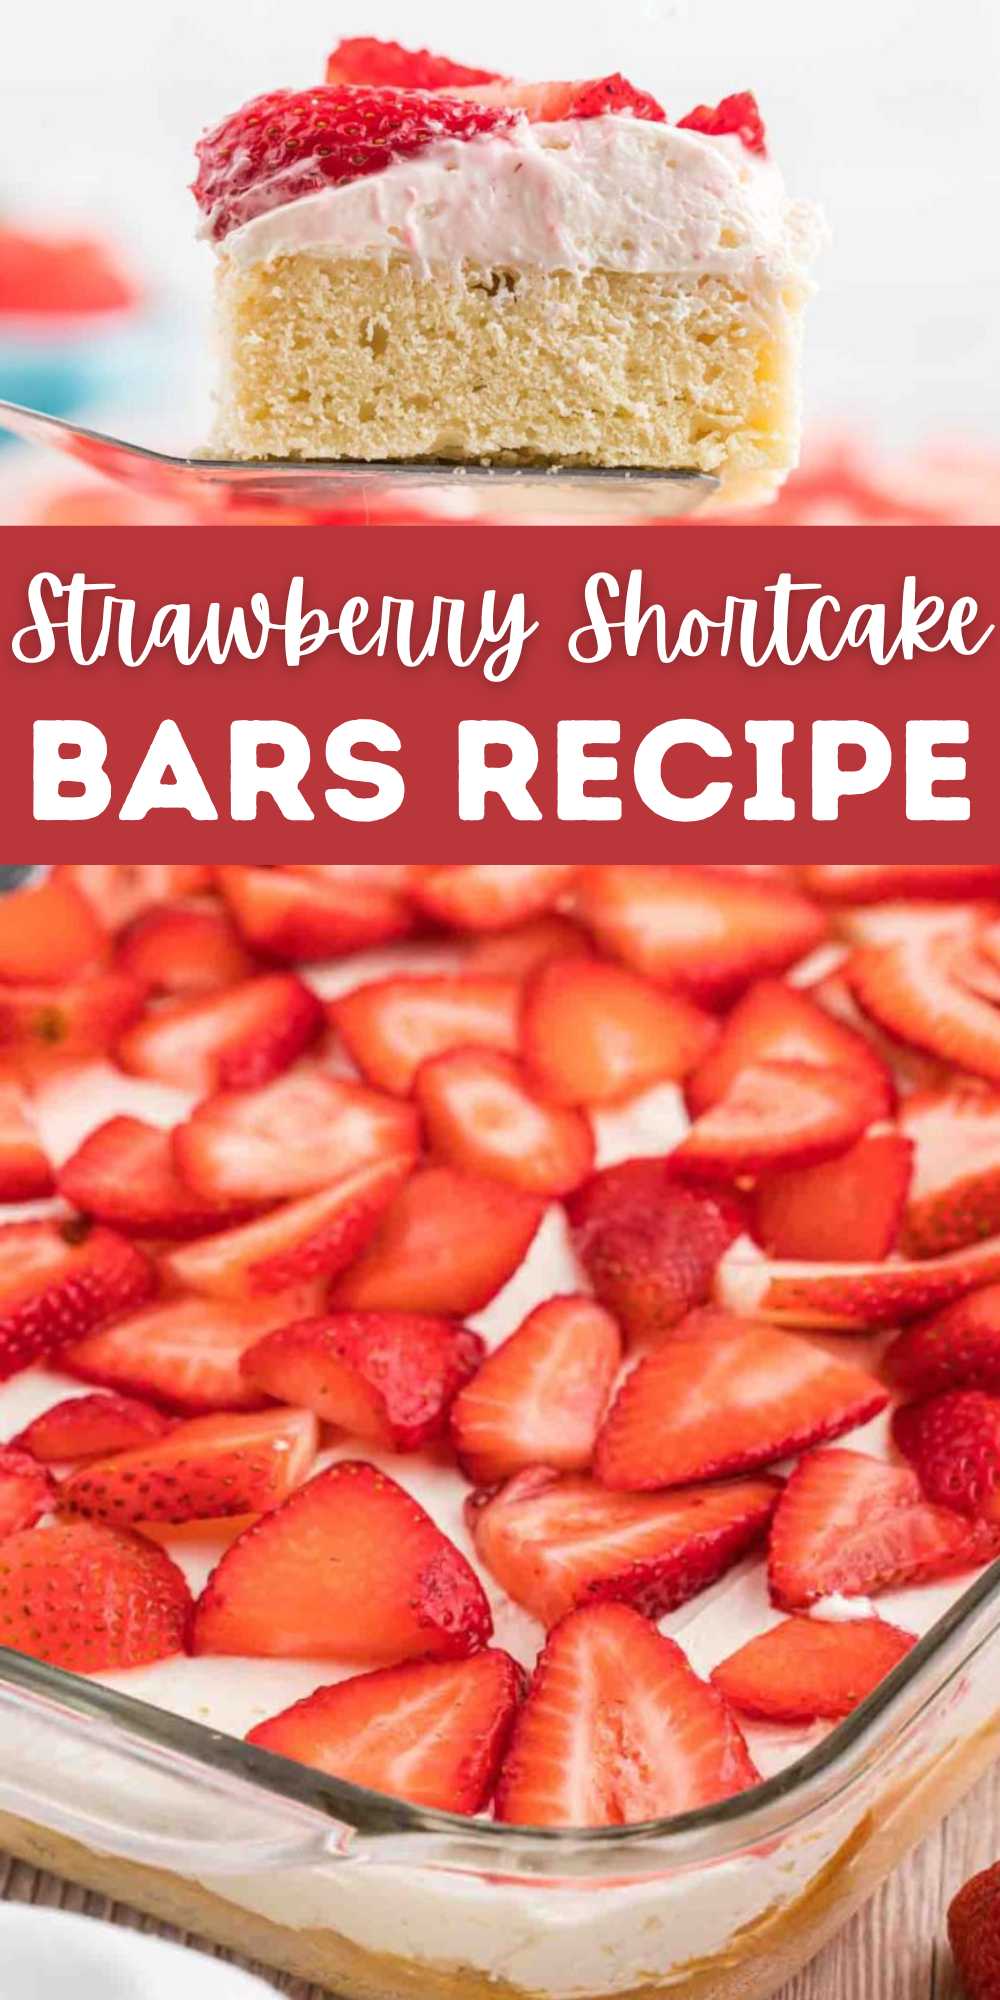 Strawberry Shortcake Bars is the perfect treat for summer. Topped with a cream cheese frosting and strawberries for a delicious dessert. You will love this simple dessert and perfect for your summer BBQ's. #eatingoandime #strawberryshortcakebars #strawberrydesserts #summertimedessert